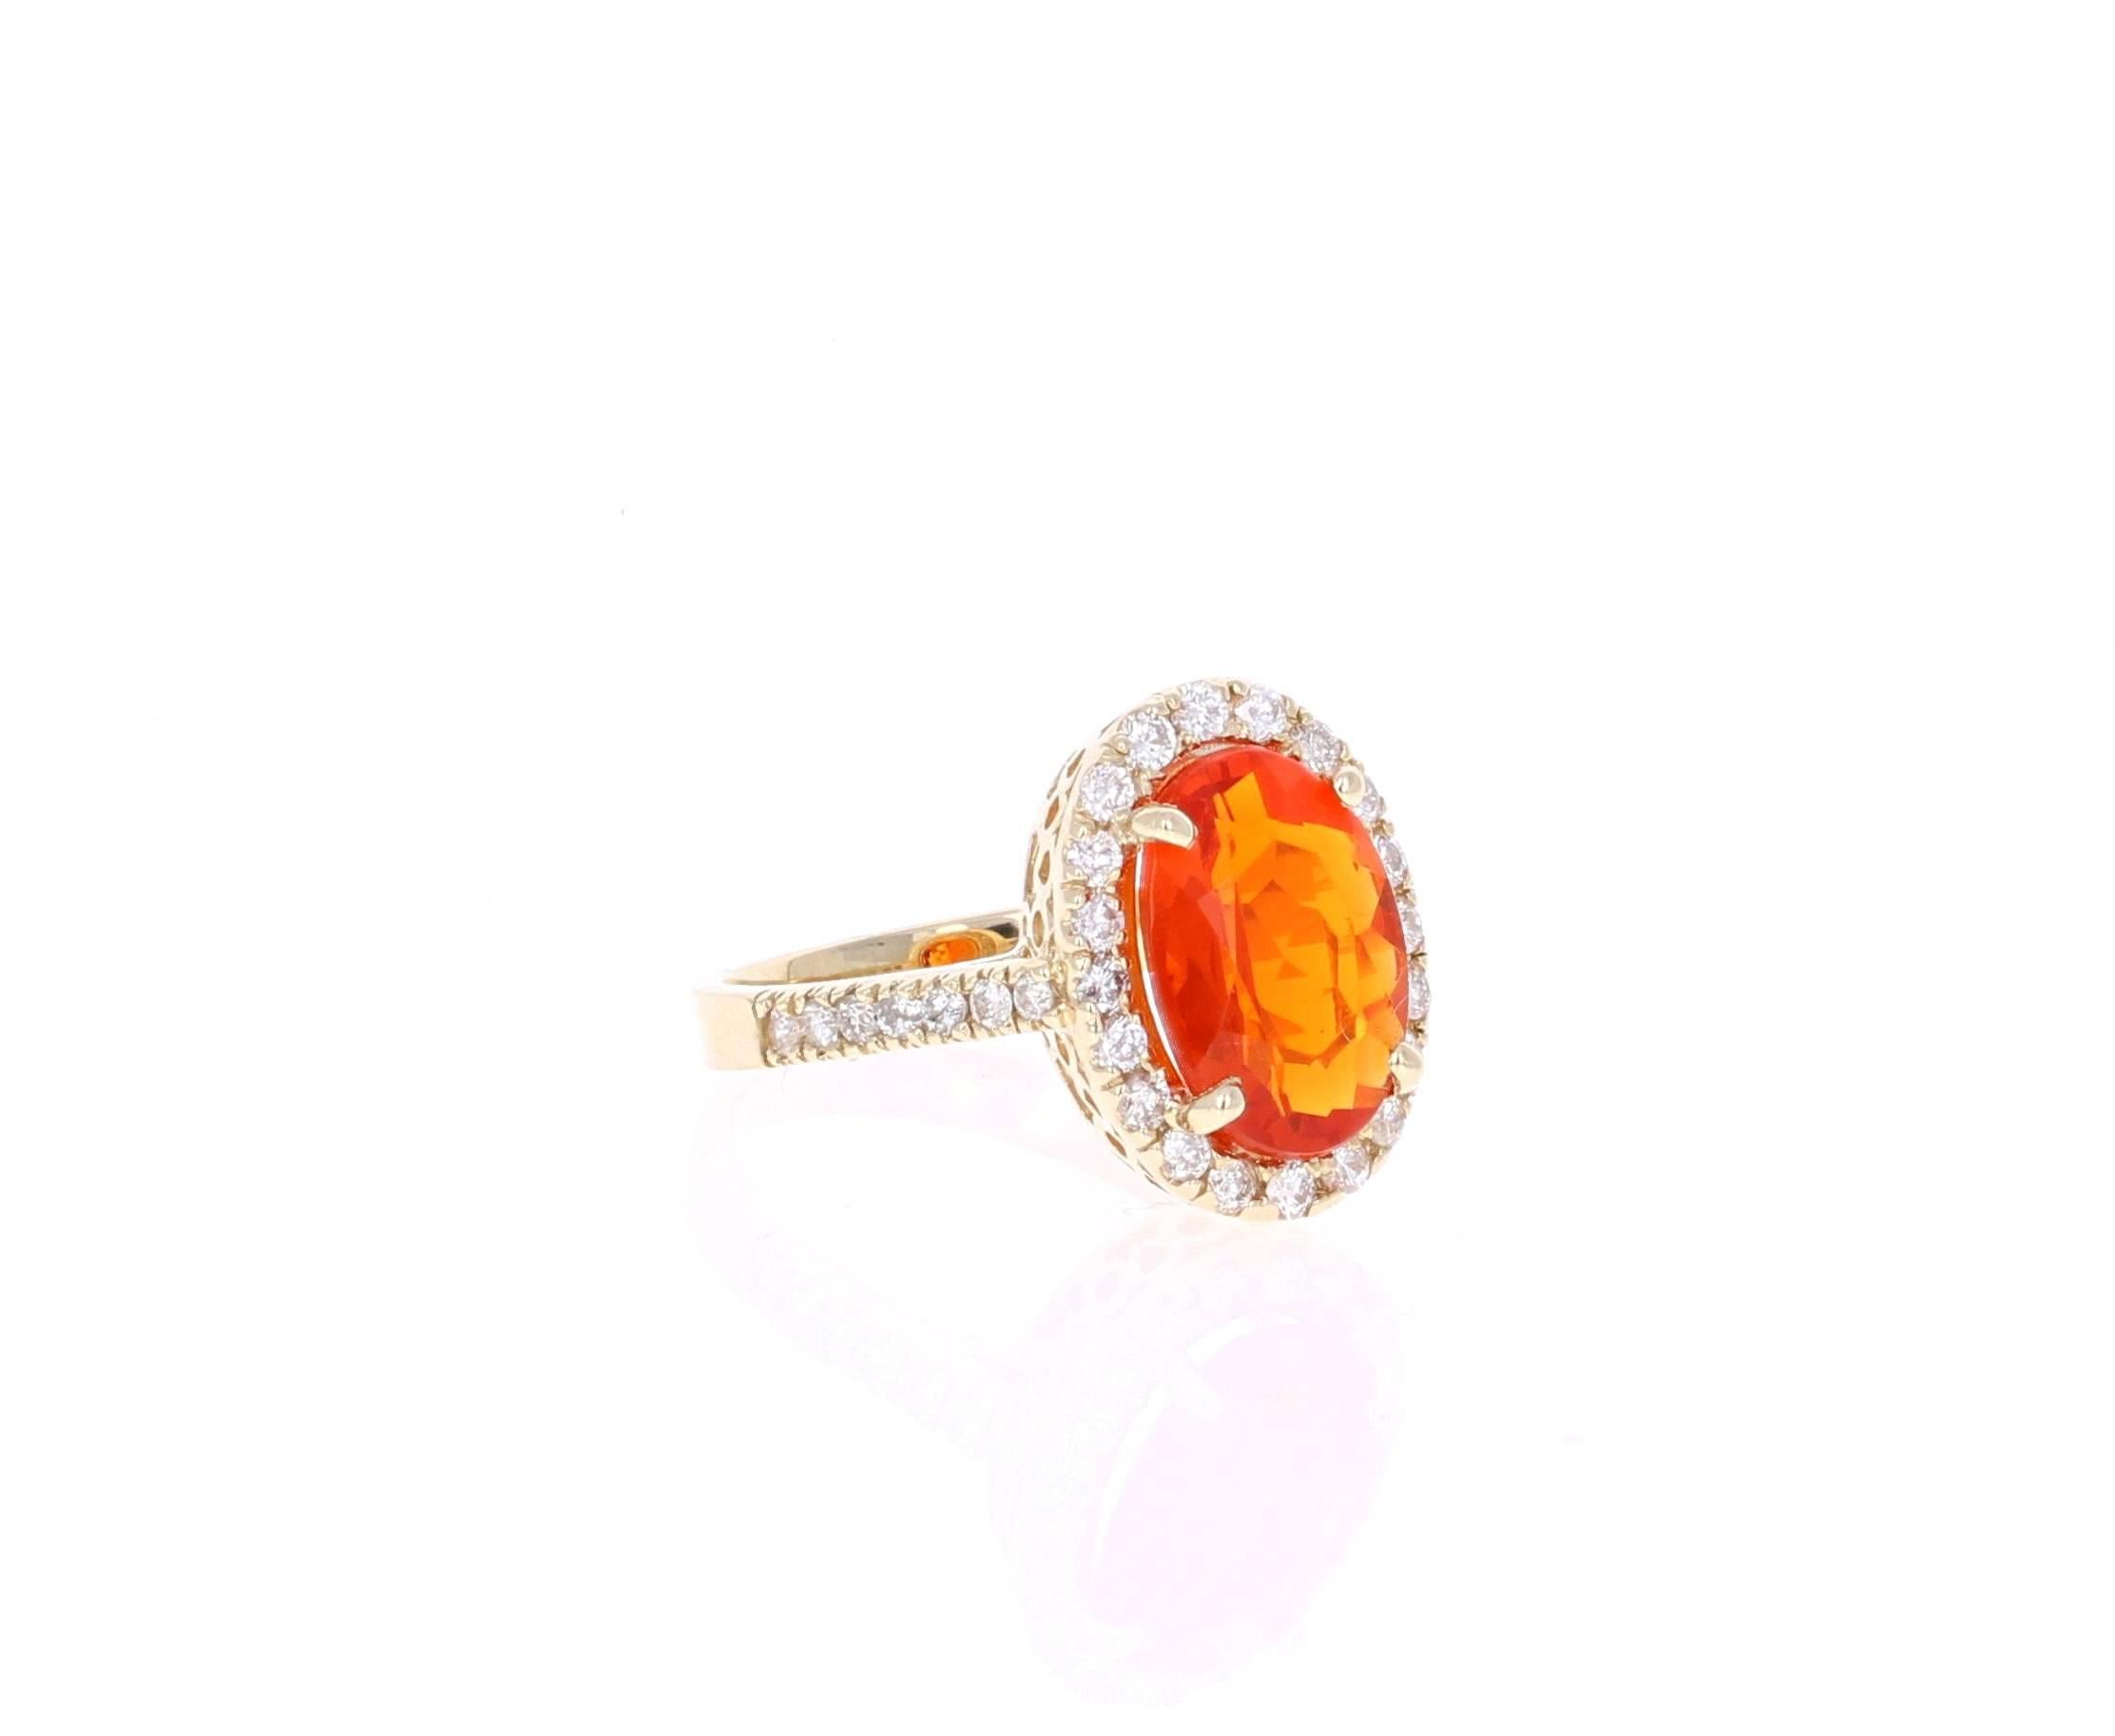 Beautiful Fire Opal and Diamond Ring. This ring has an Oval Cut 2.52 carat Fire Opal in the center of the ring and is surrounded by a halo of 34 Round Cut Diamonds that weigh a total of 0.70 carat.  The total carat weight of the ring is 3.22 carats.